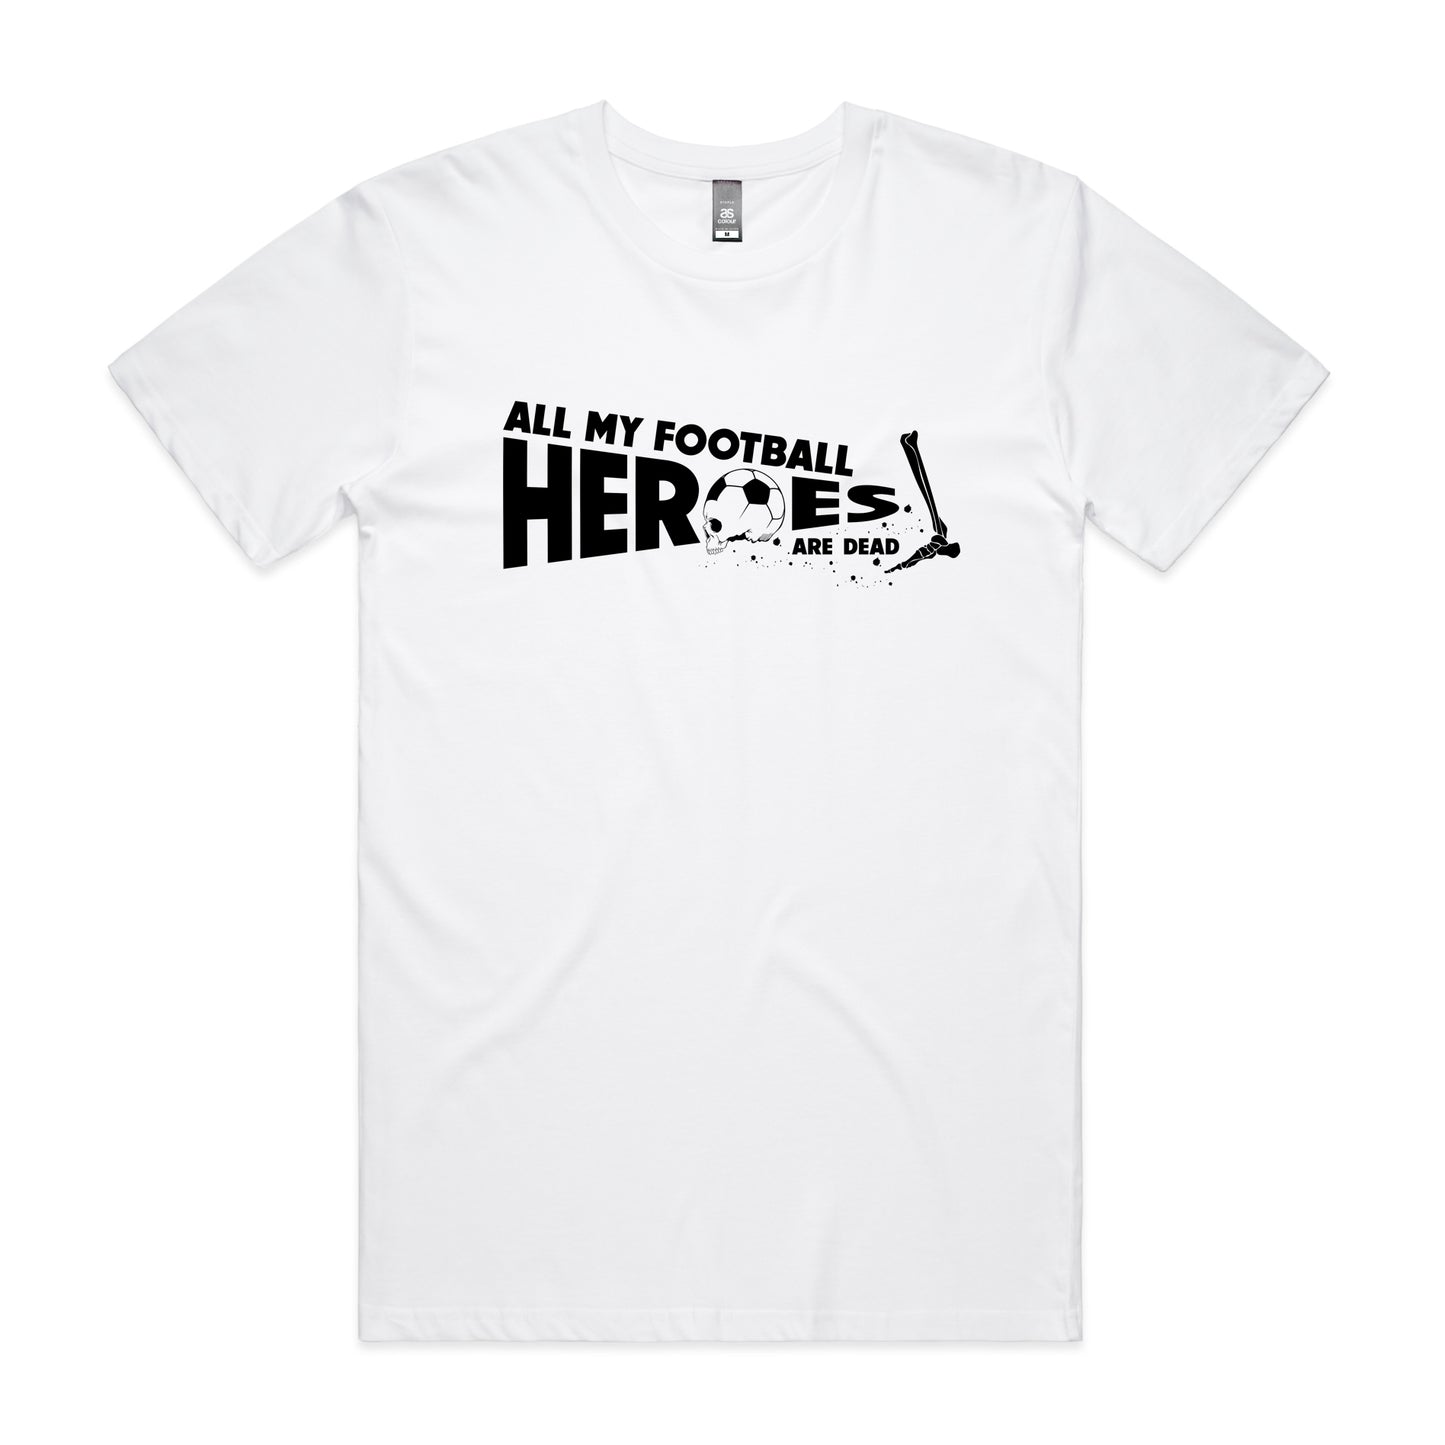 All My Football Heroes Are Dead T-shirt